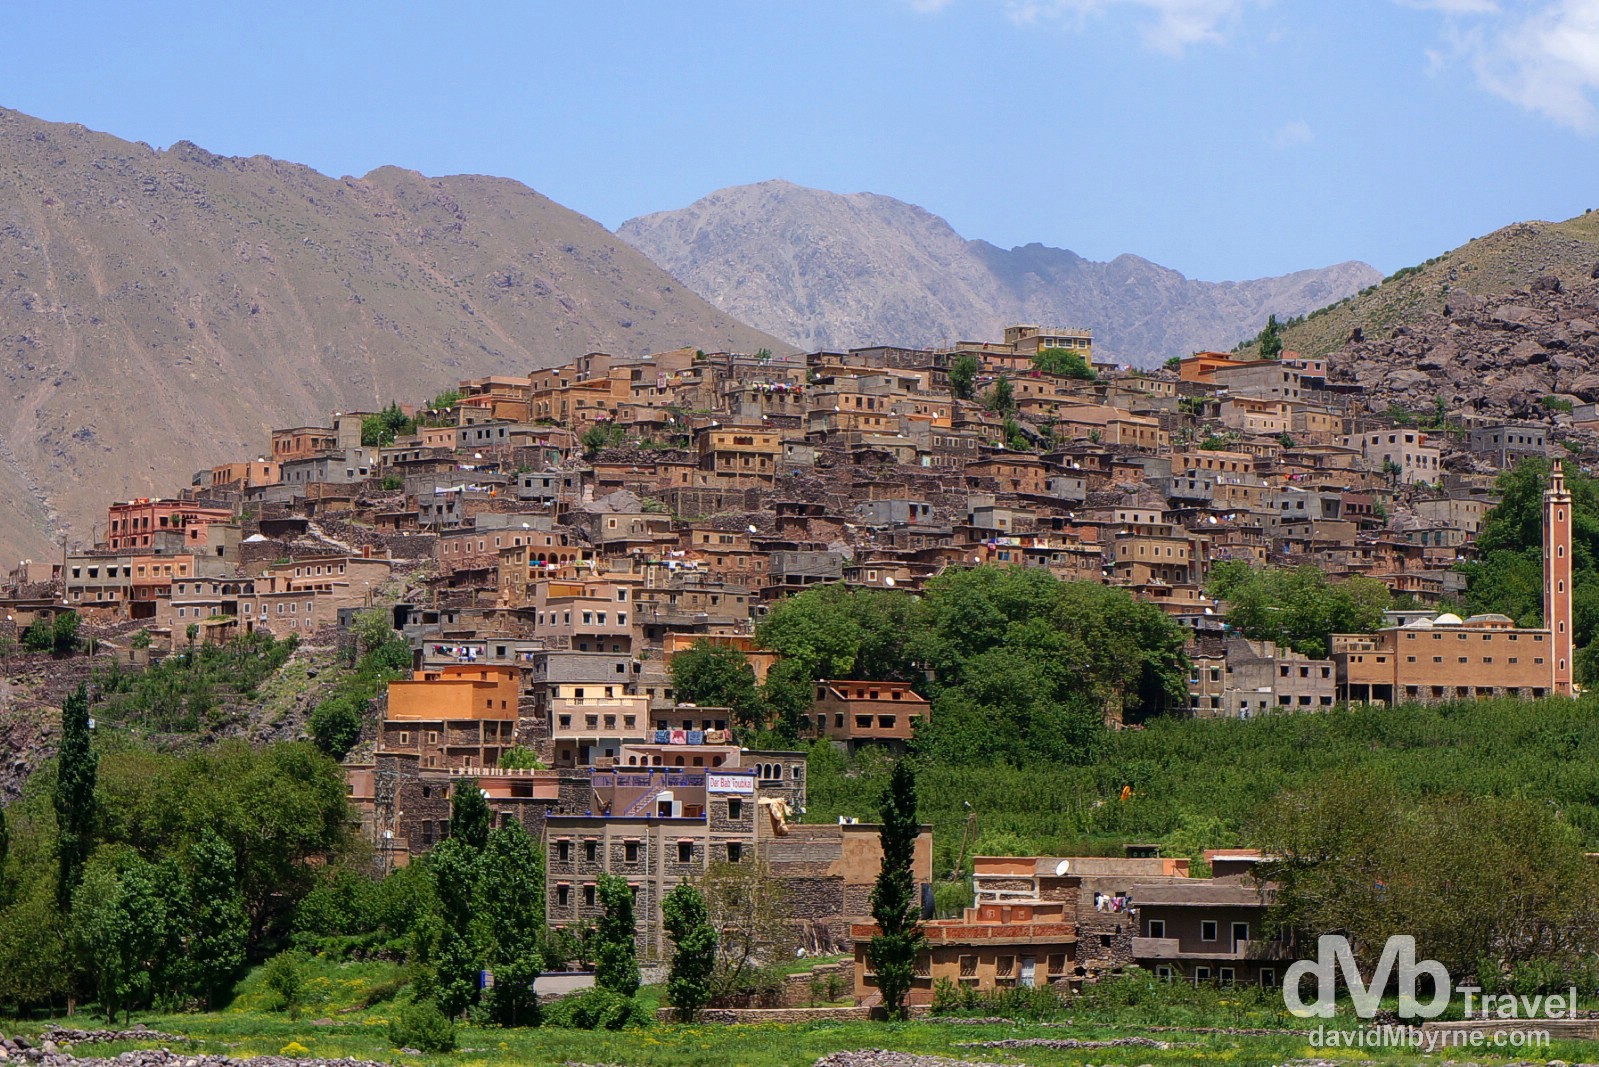 The village of Aroumd as seen from the Mizane Valley, High Atlas, central Morocco. May 10th, 2014.